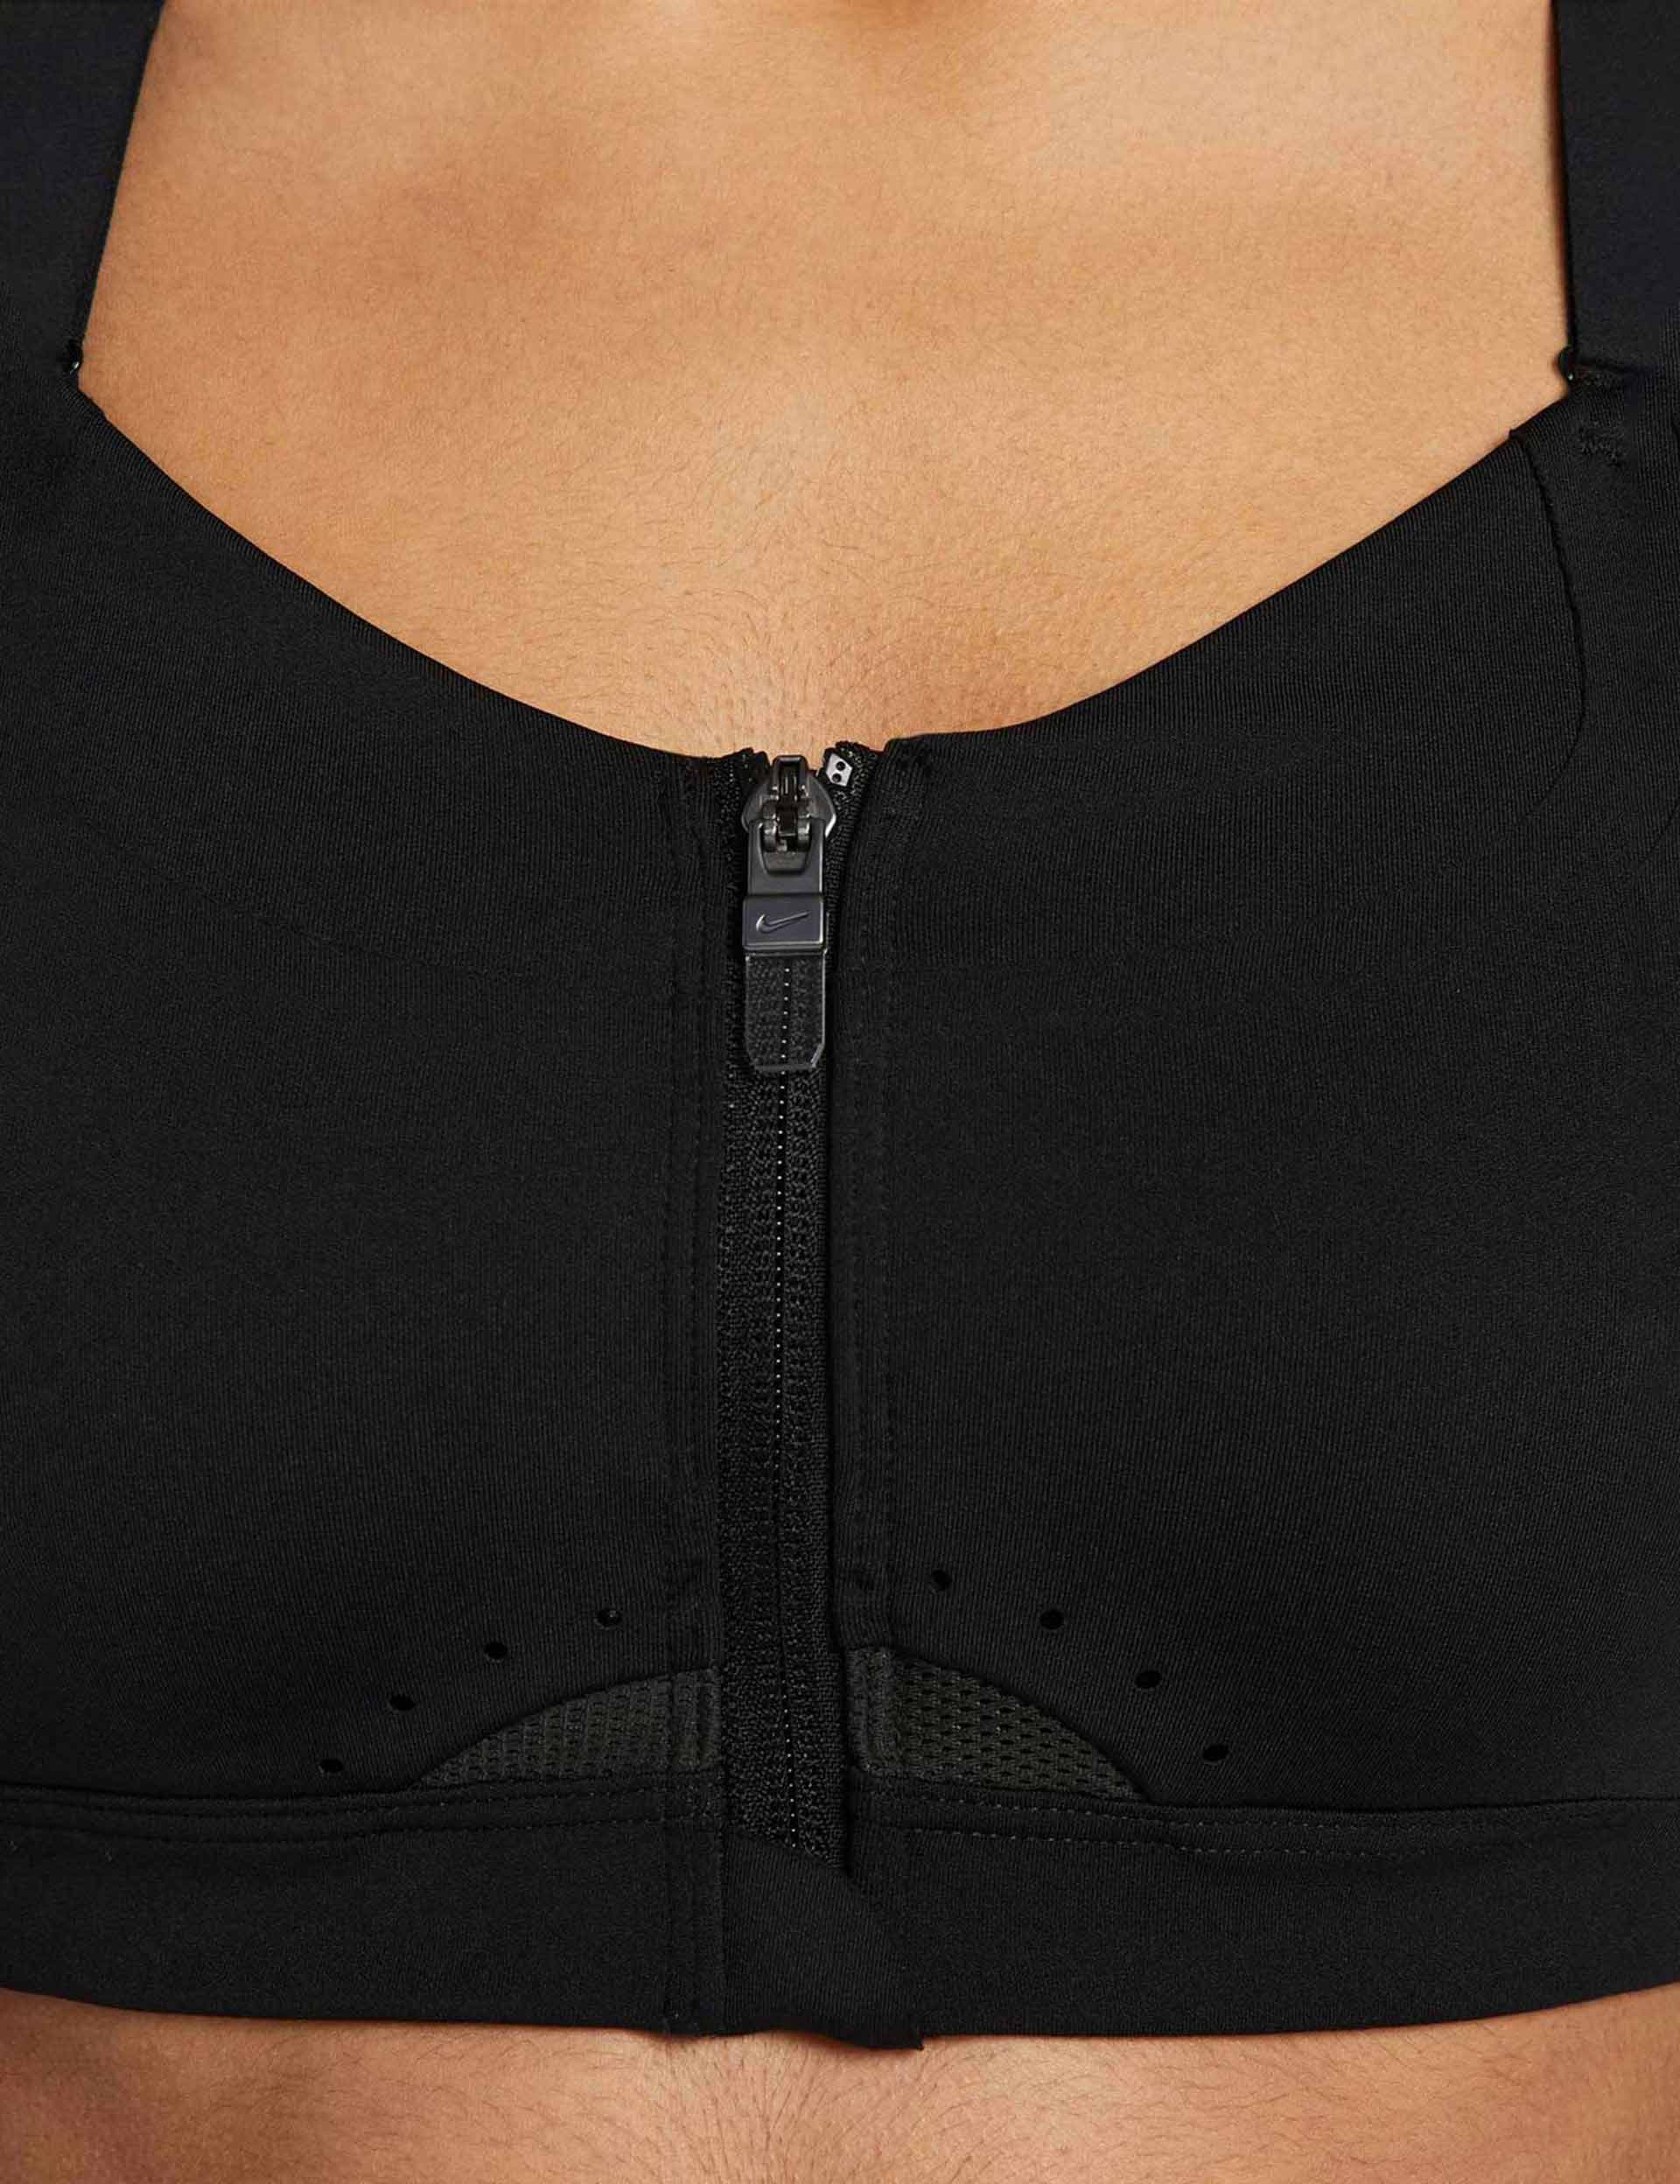 Sports Bra for Women High Impact Work Out Bra with Support Front Zipper Gym  Padded Bras with Adjustable Straps : Buy Online at Best Price in KSA 